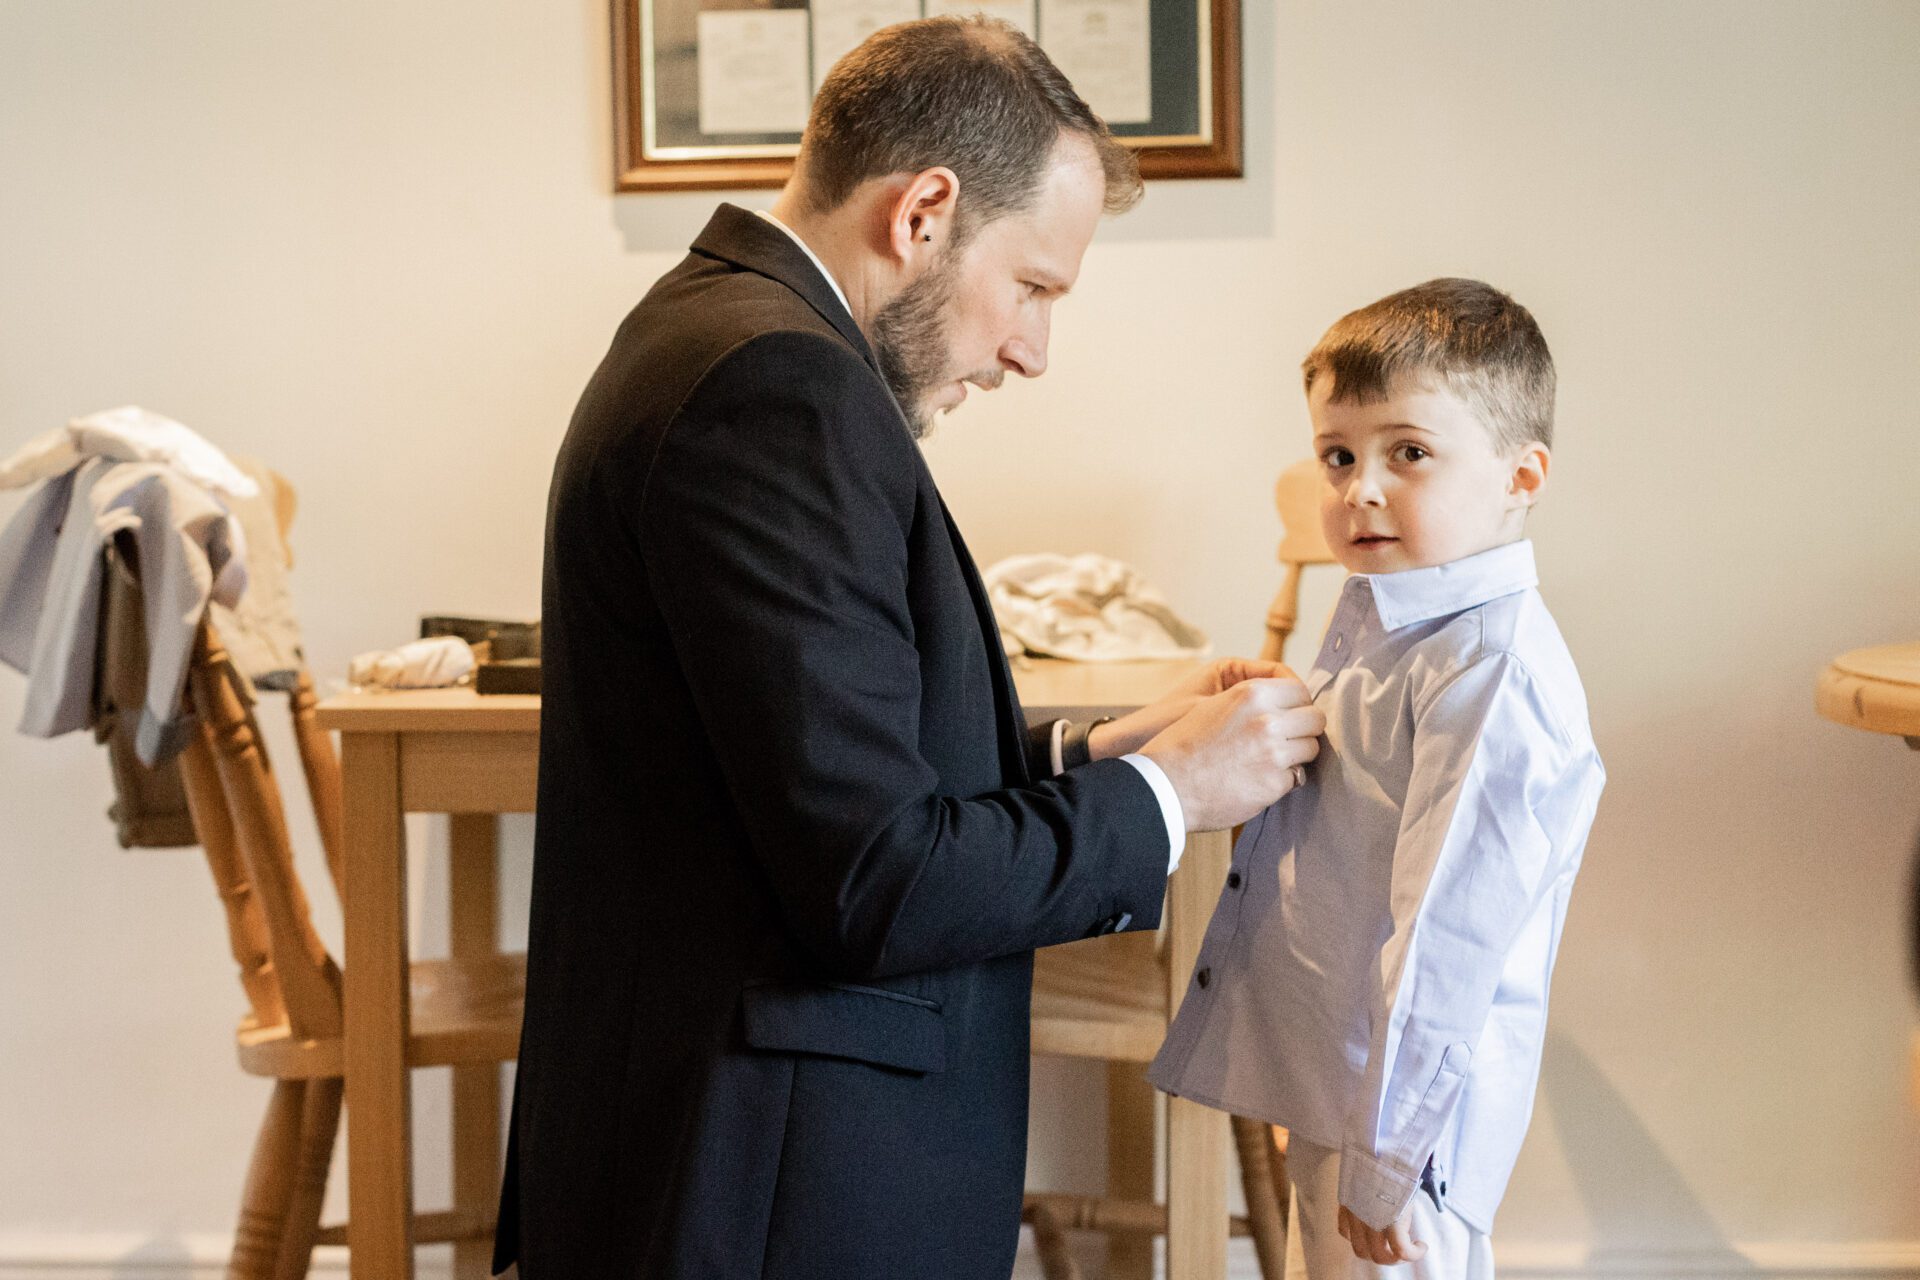 The groom helps his son get ready for the wedding